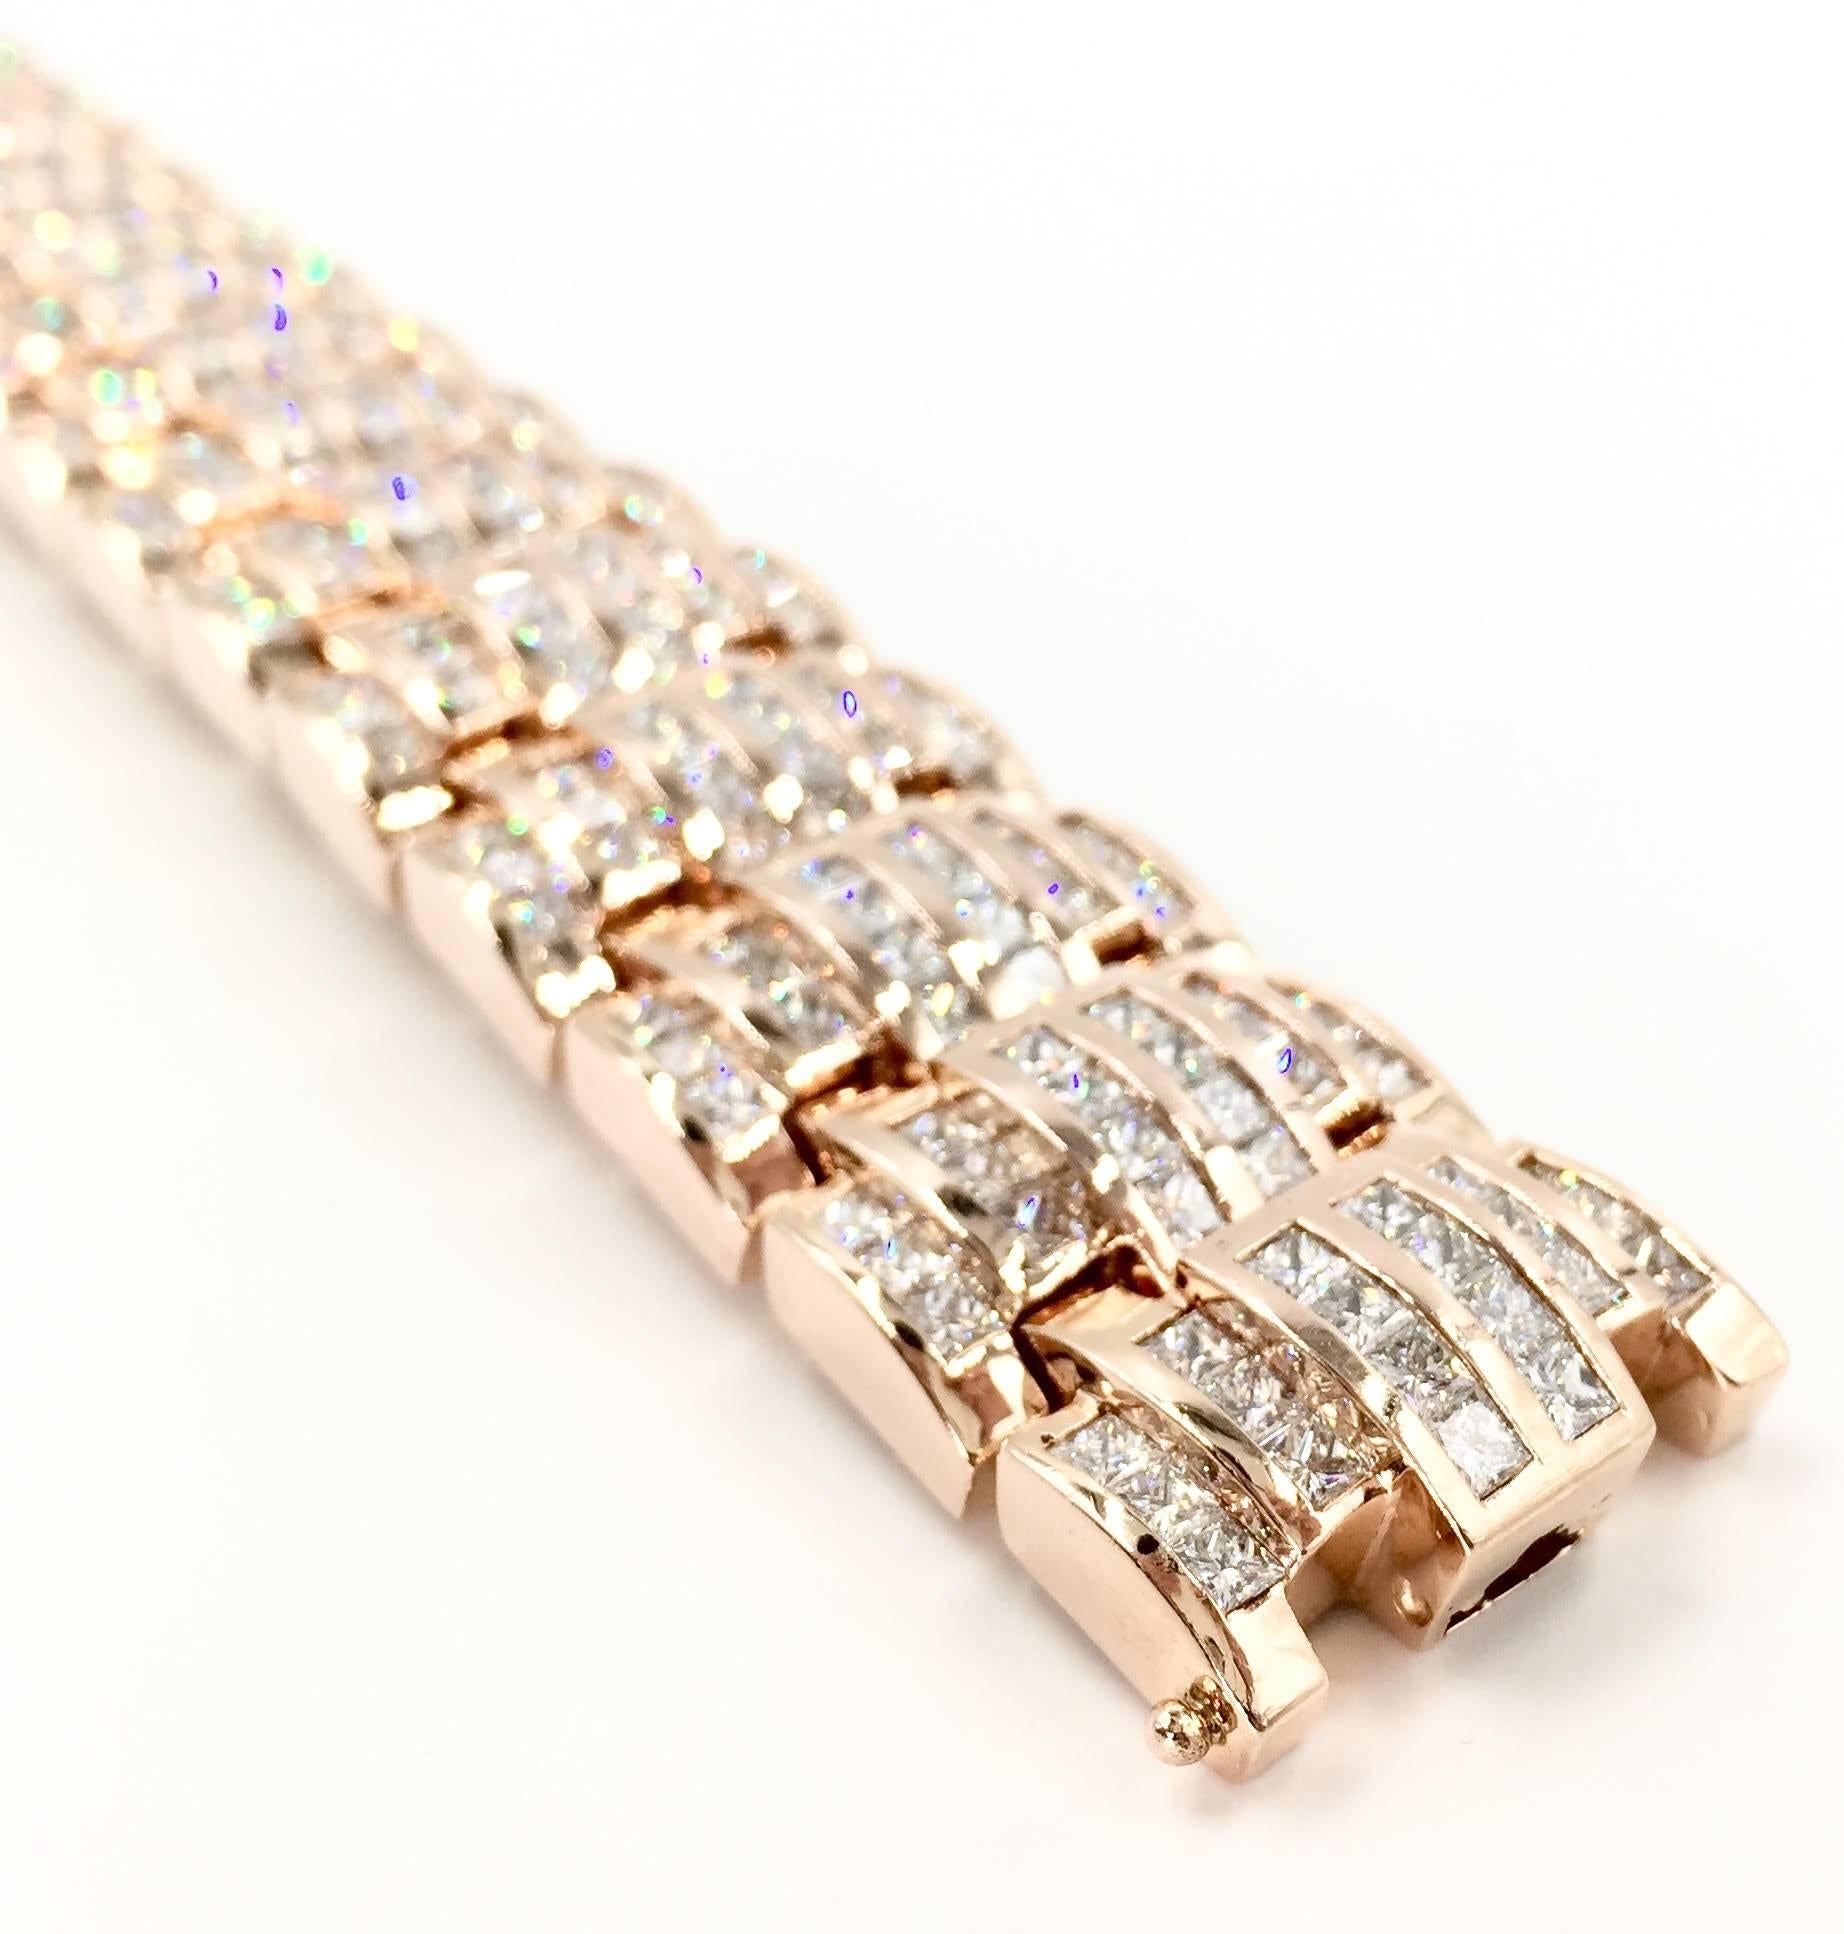 This 14K rose gold bracelet features beautifully channel-set princess-cut diamonds with a total weight of 34.00 carats. Designed by Quadamas, a jewelry manufacturer specializing in exquisite channel-set and invisibly-set jewelry. This is a statement